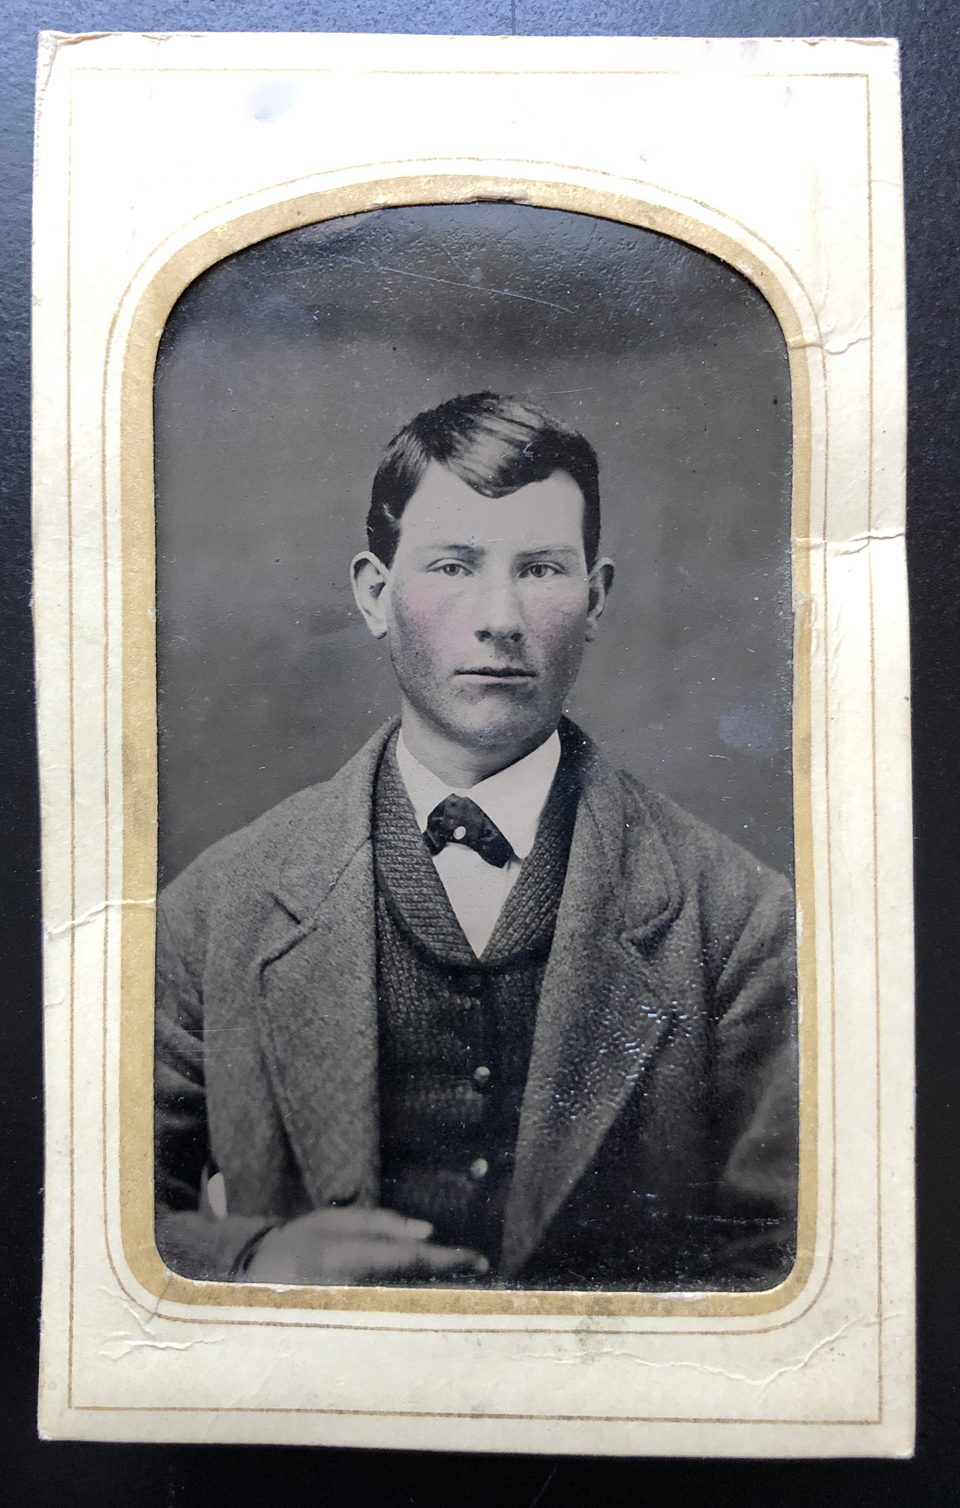 Historic Tintype Portrait by A.L. Barry of Port Deposit, Maryland.